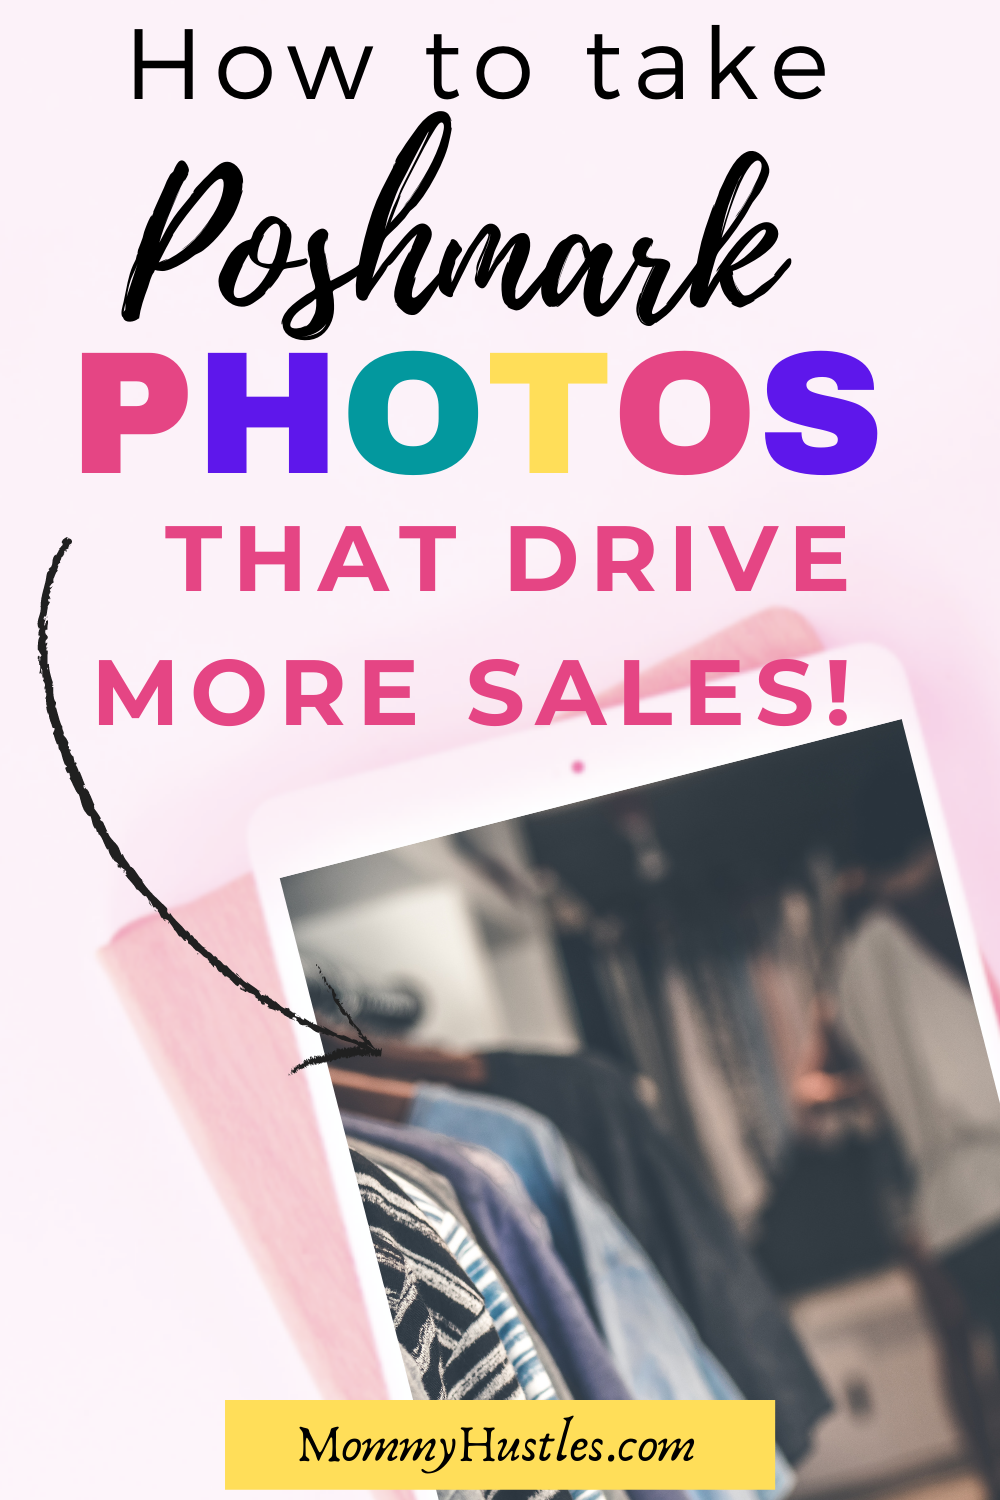 How to Take Poshmark Photos That Drive More Sales